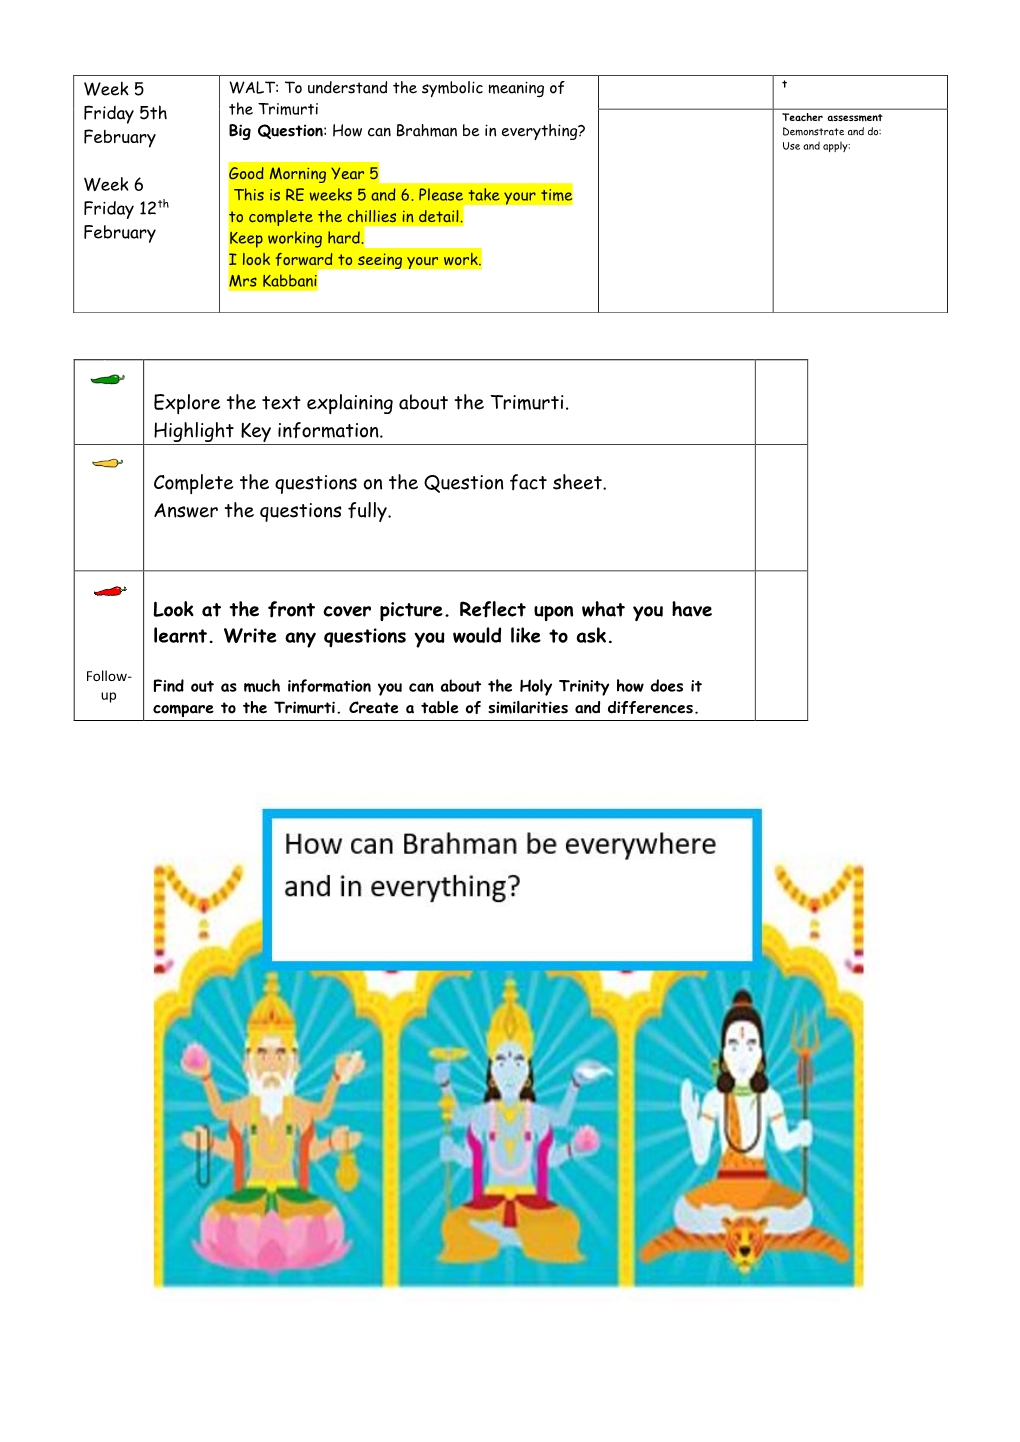 Explore the Text Explaining About the Trimurti. Highlight Key Information